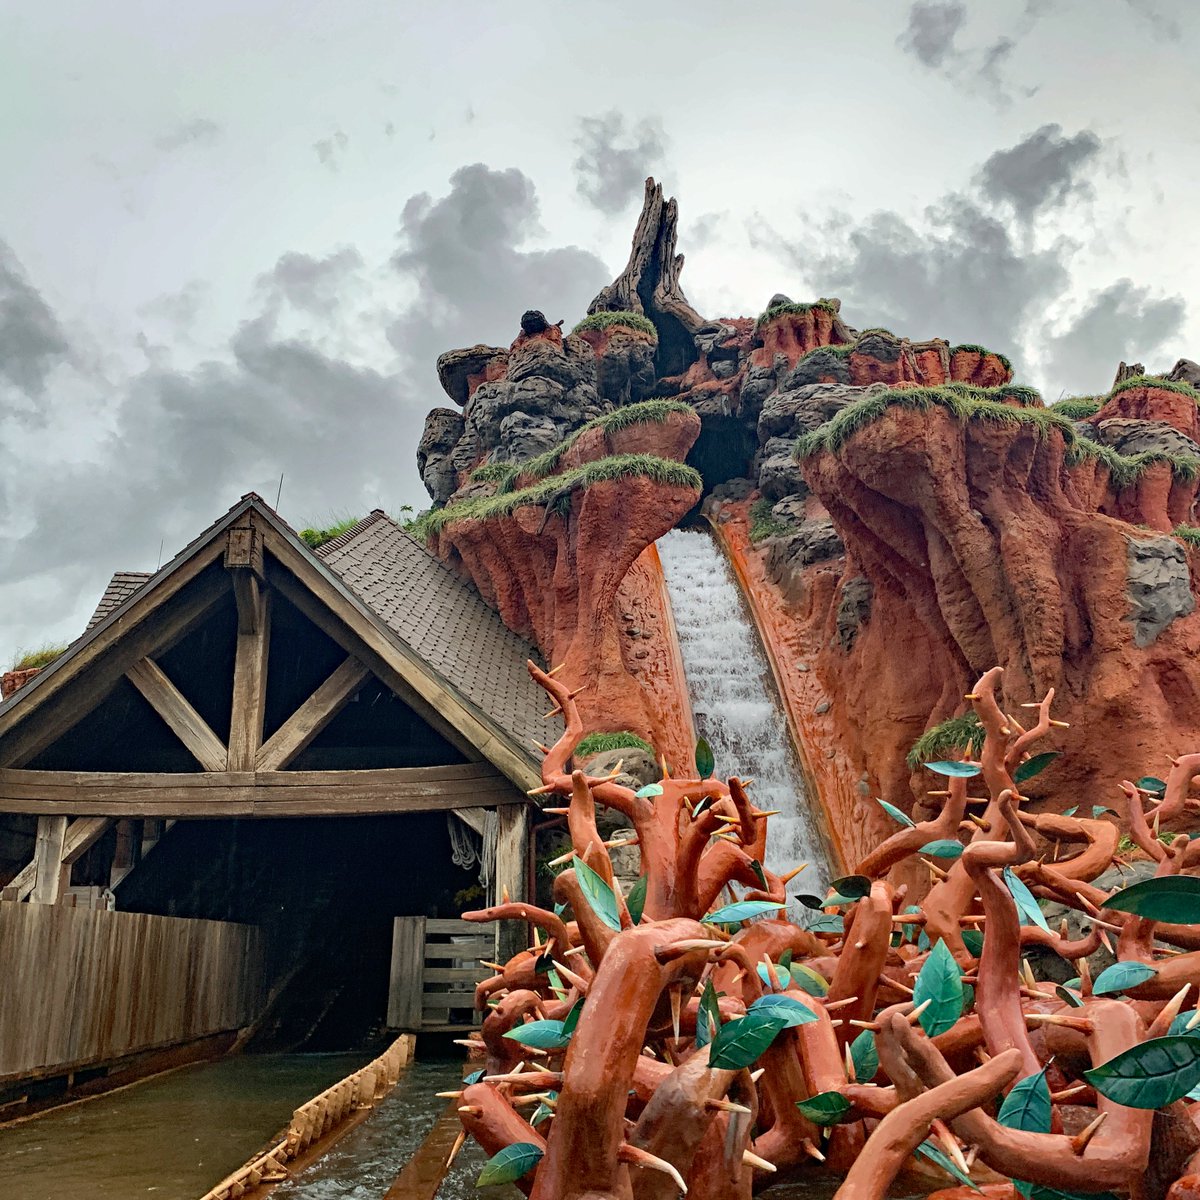 Splash Mountain has been one of my favorite attractions at both Disneyland and Walt Disney World since I can remember.